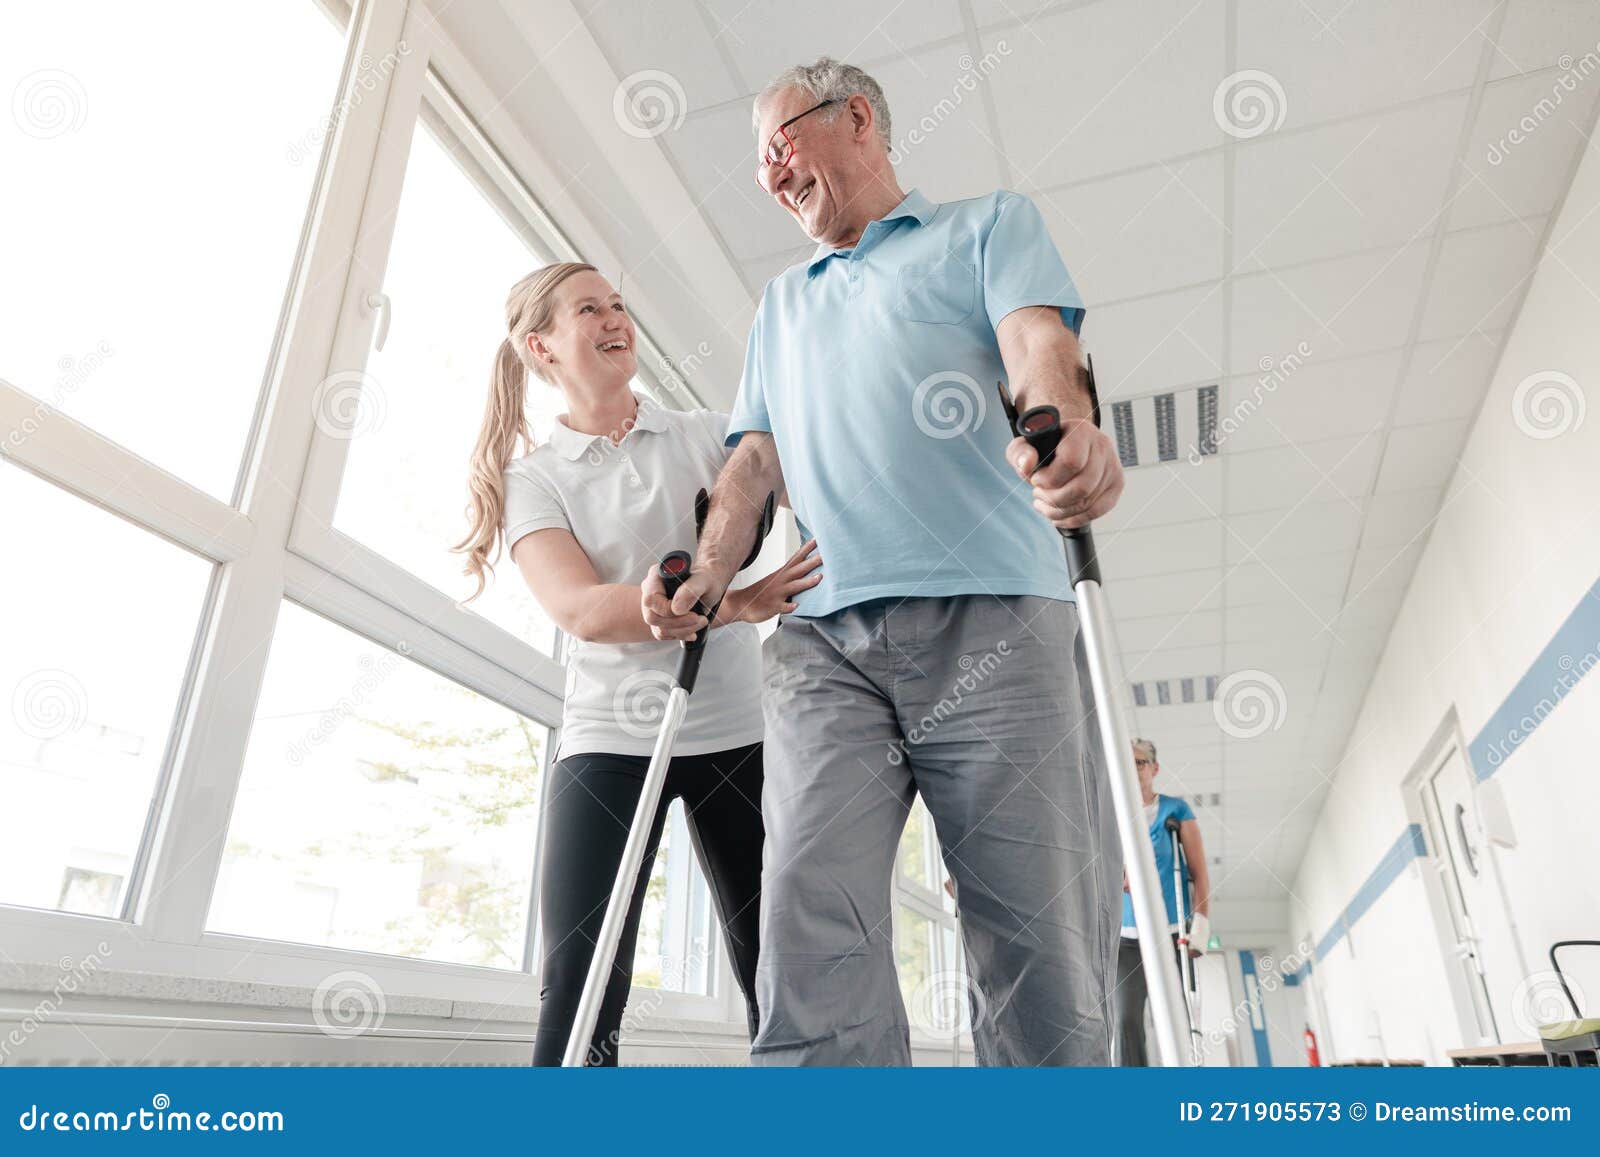 seniors in rehabilitation learning how to walk with crutches